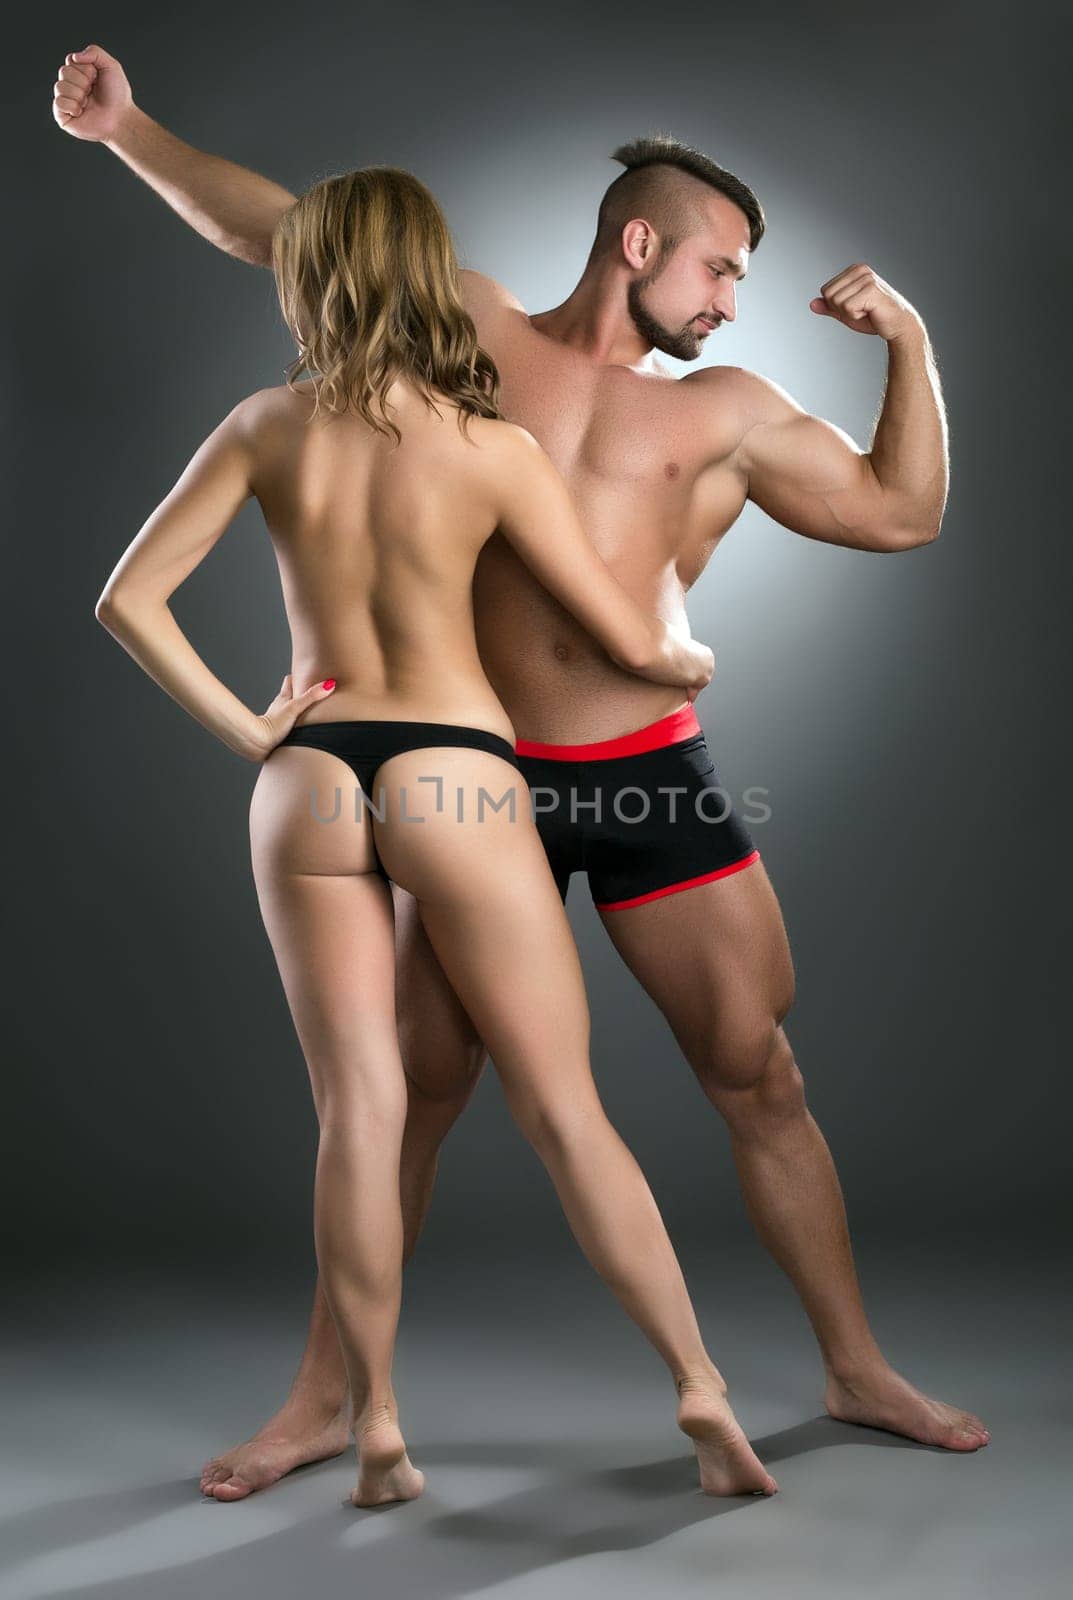 Strong guys attract sexy girls. Studio shot, on grey backdrop